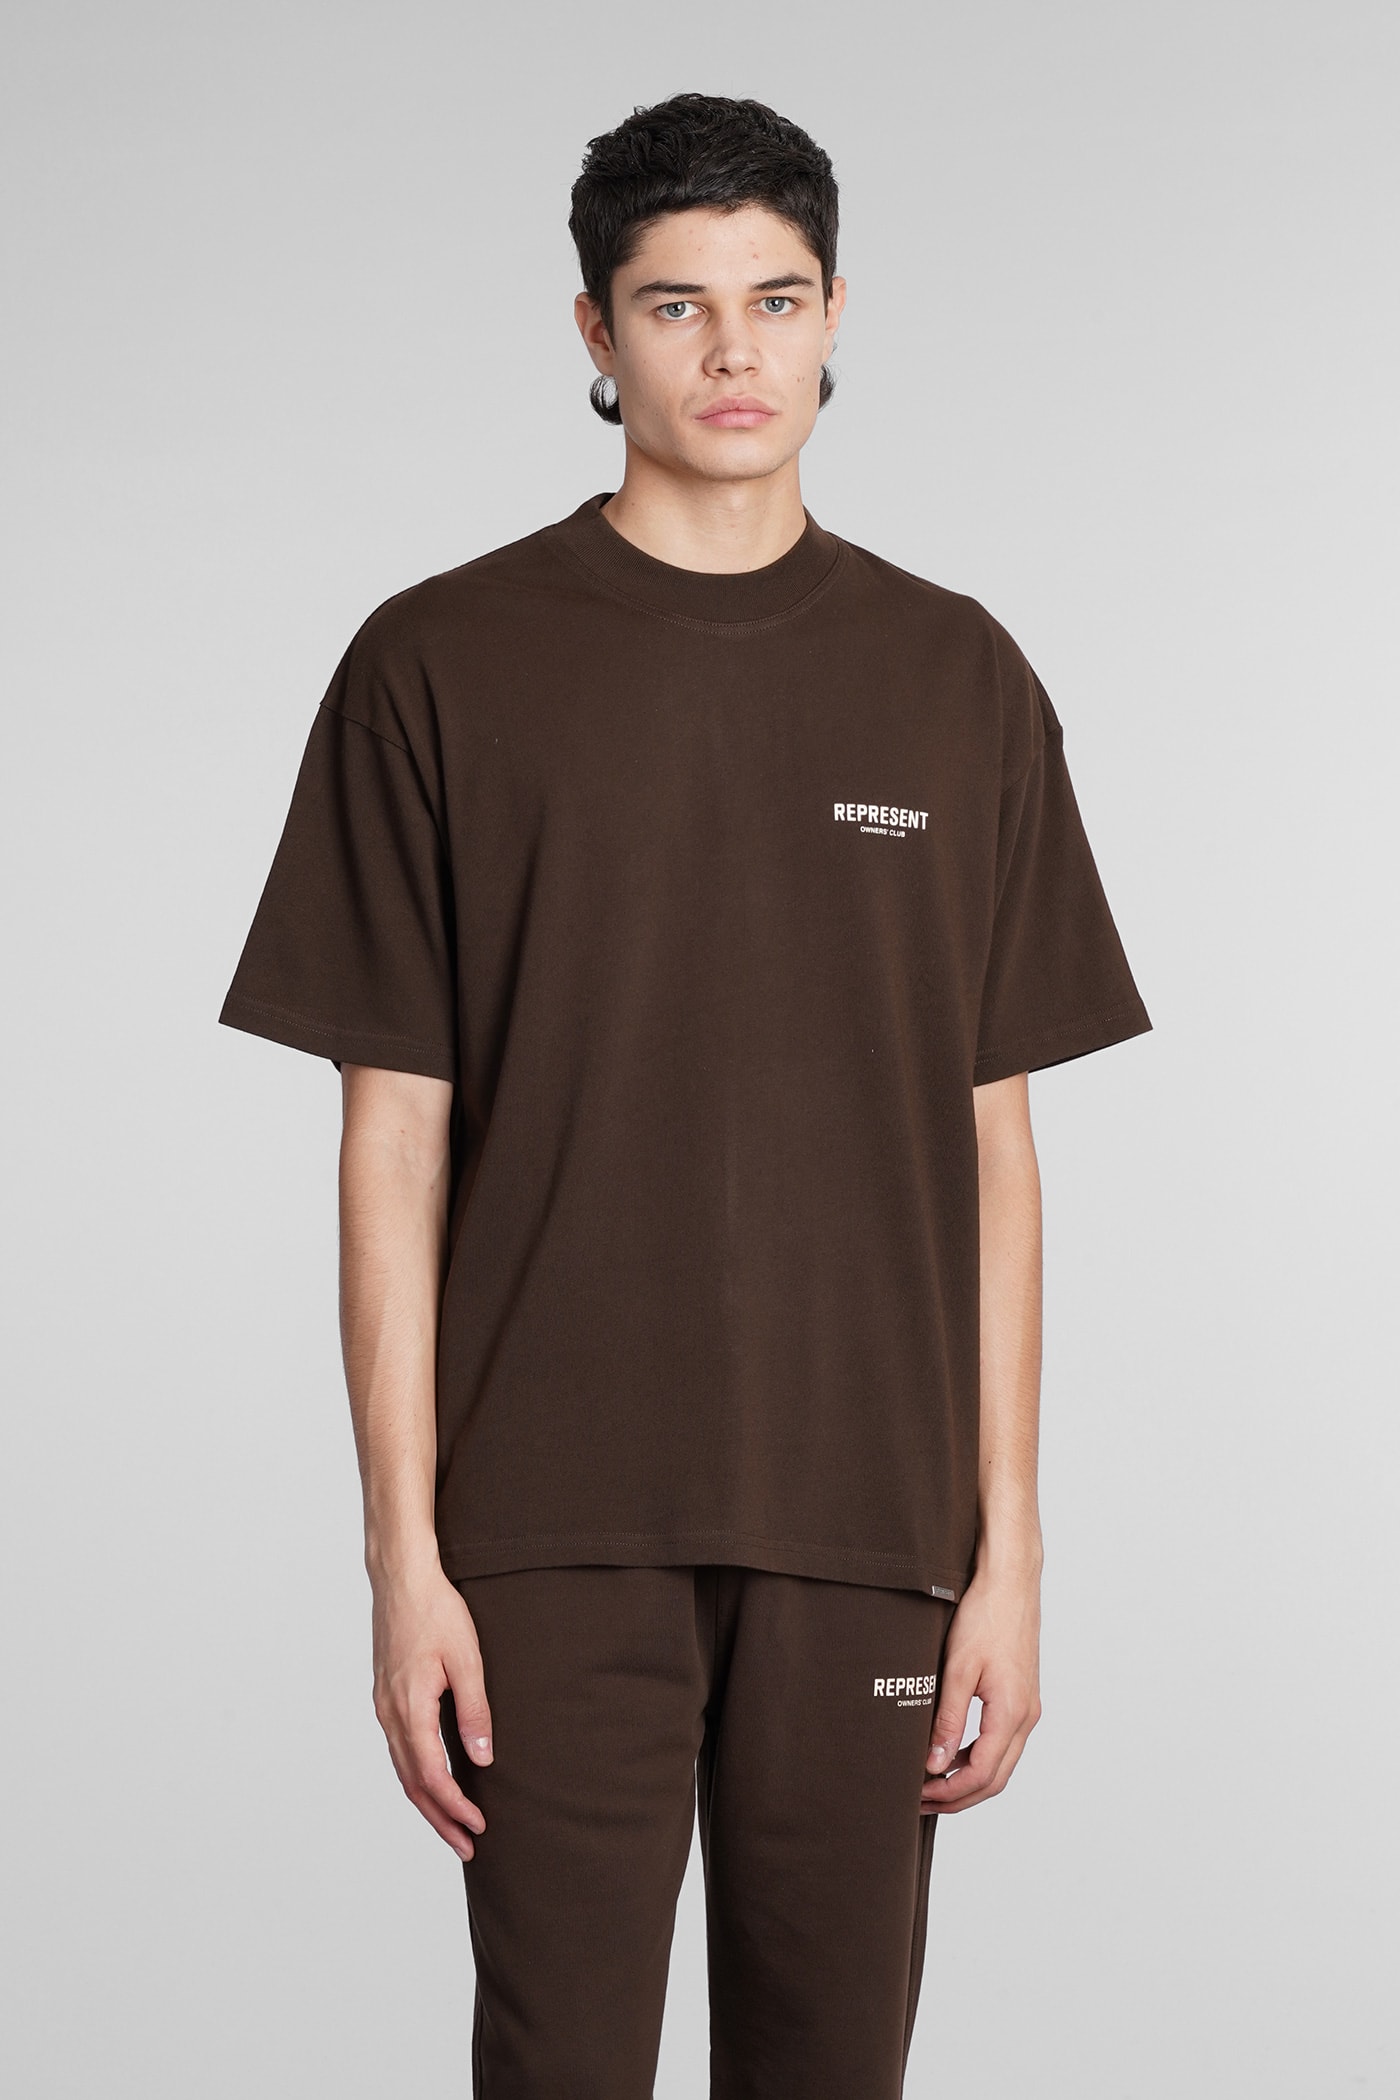 REPRESENT T-SHIRT IN BROWN COTTON